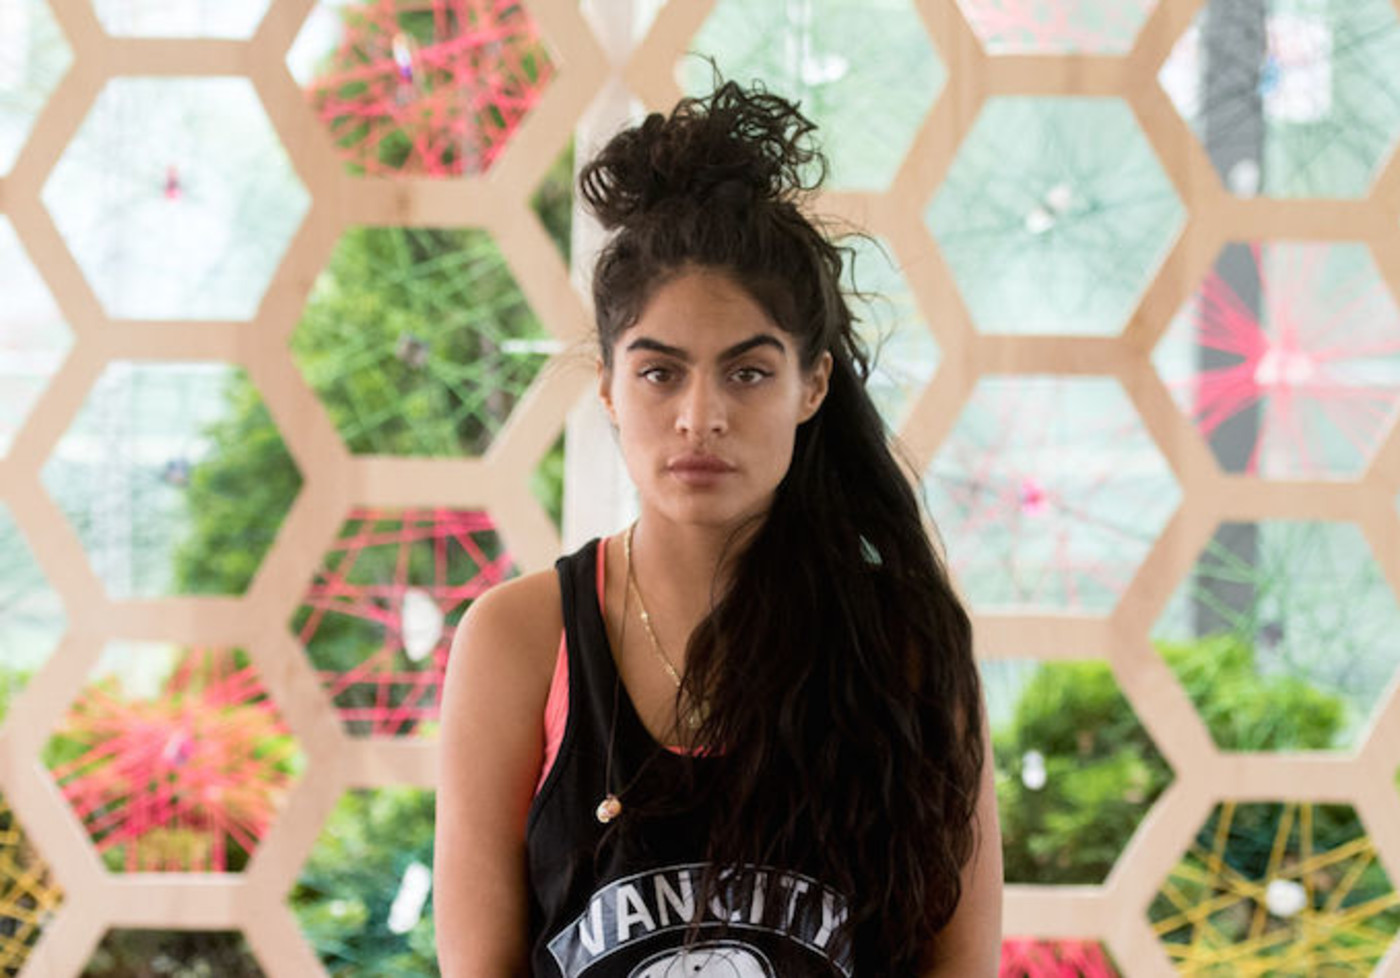 Jessie Reyez Accuses Music Producer Detail of Sexual Misconduct | Complex